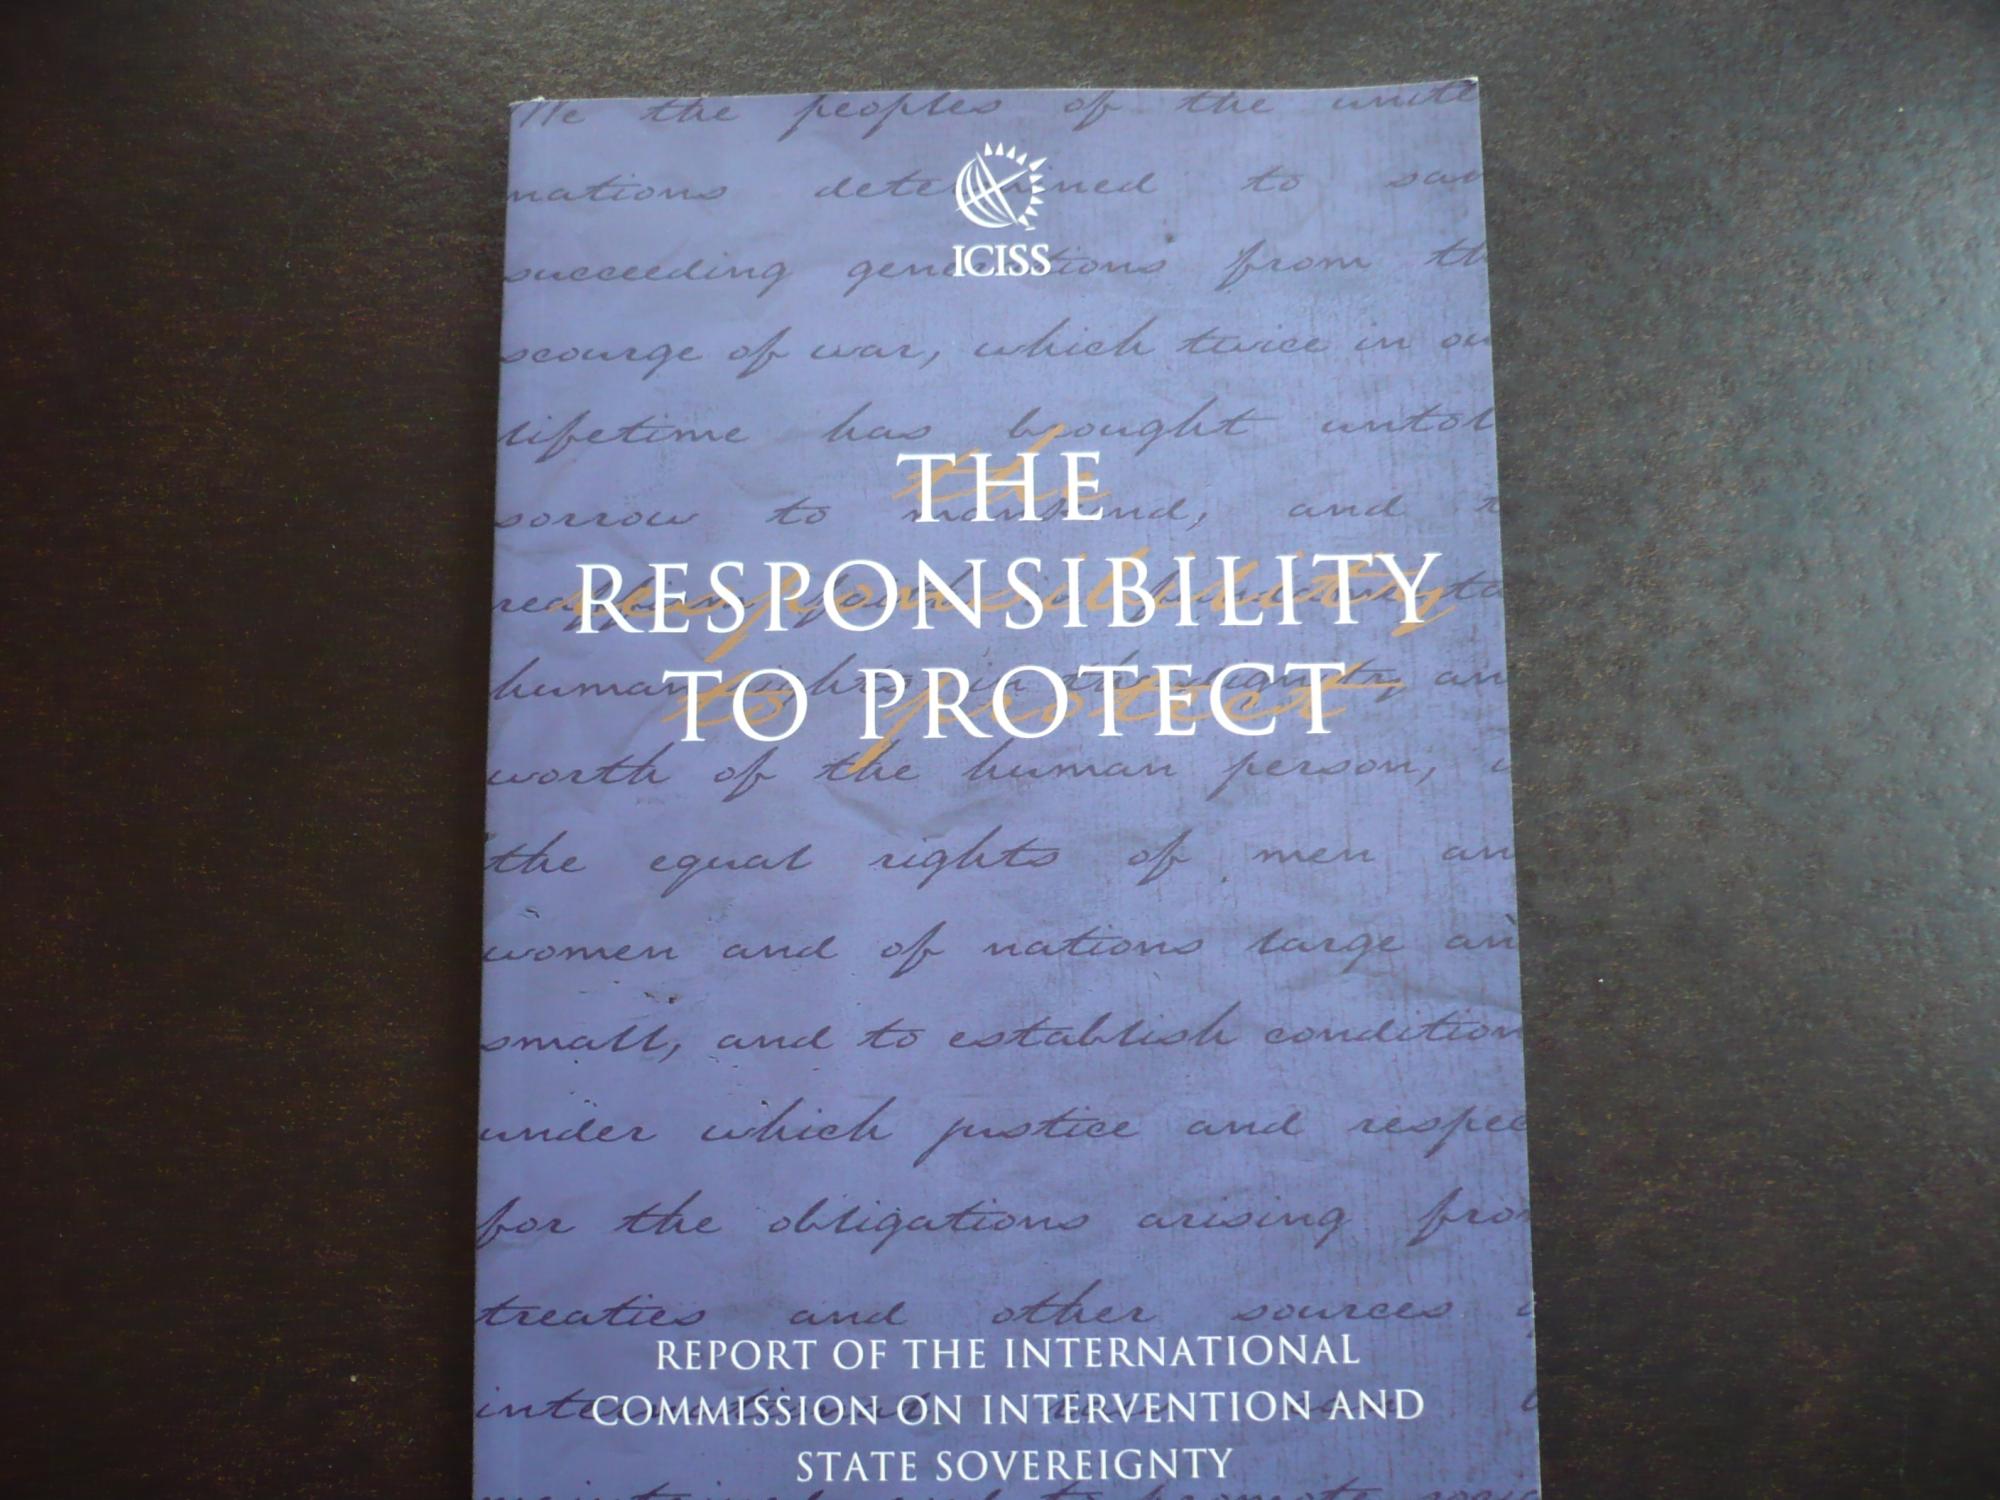 The Responsibility to Protect: Report of the International Commission on Intervention and State Sovereignty. - Evans, Gareth and Mohamed Sahnoun